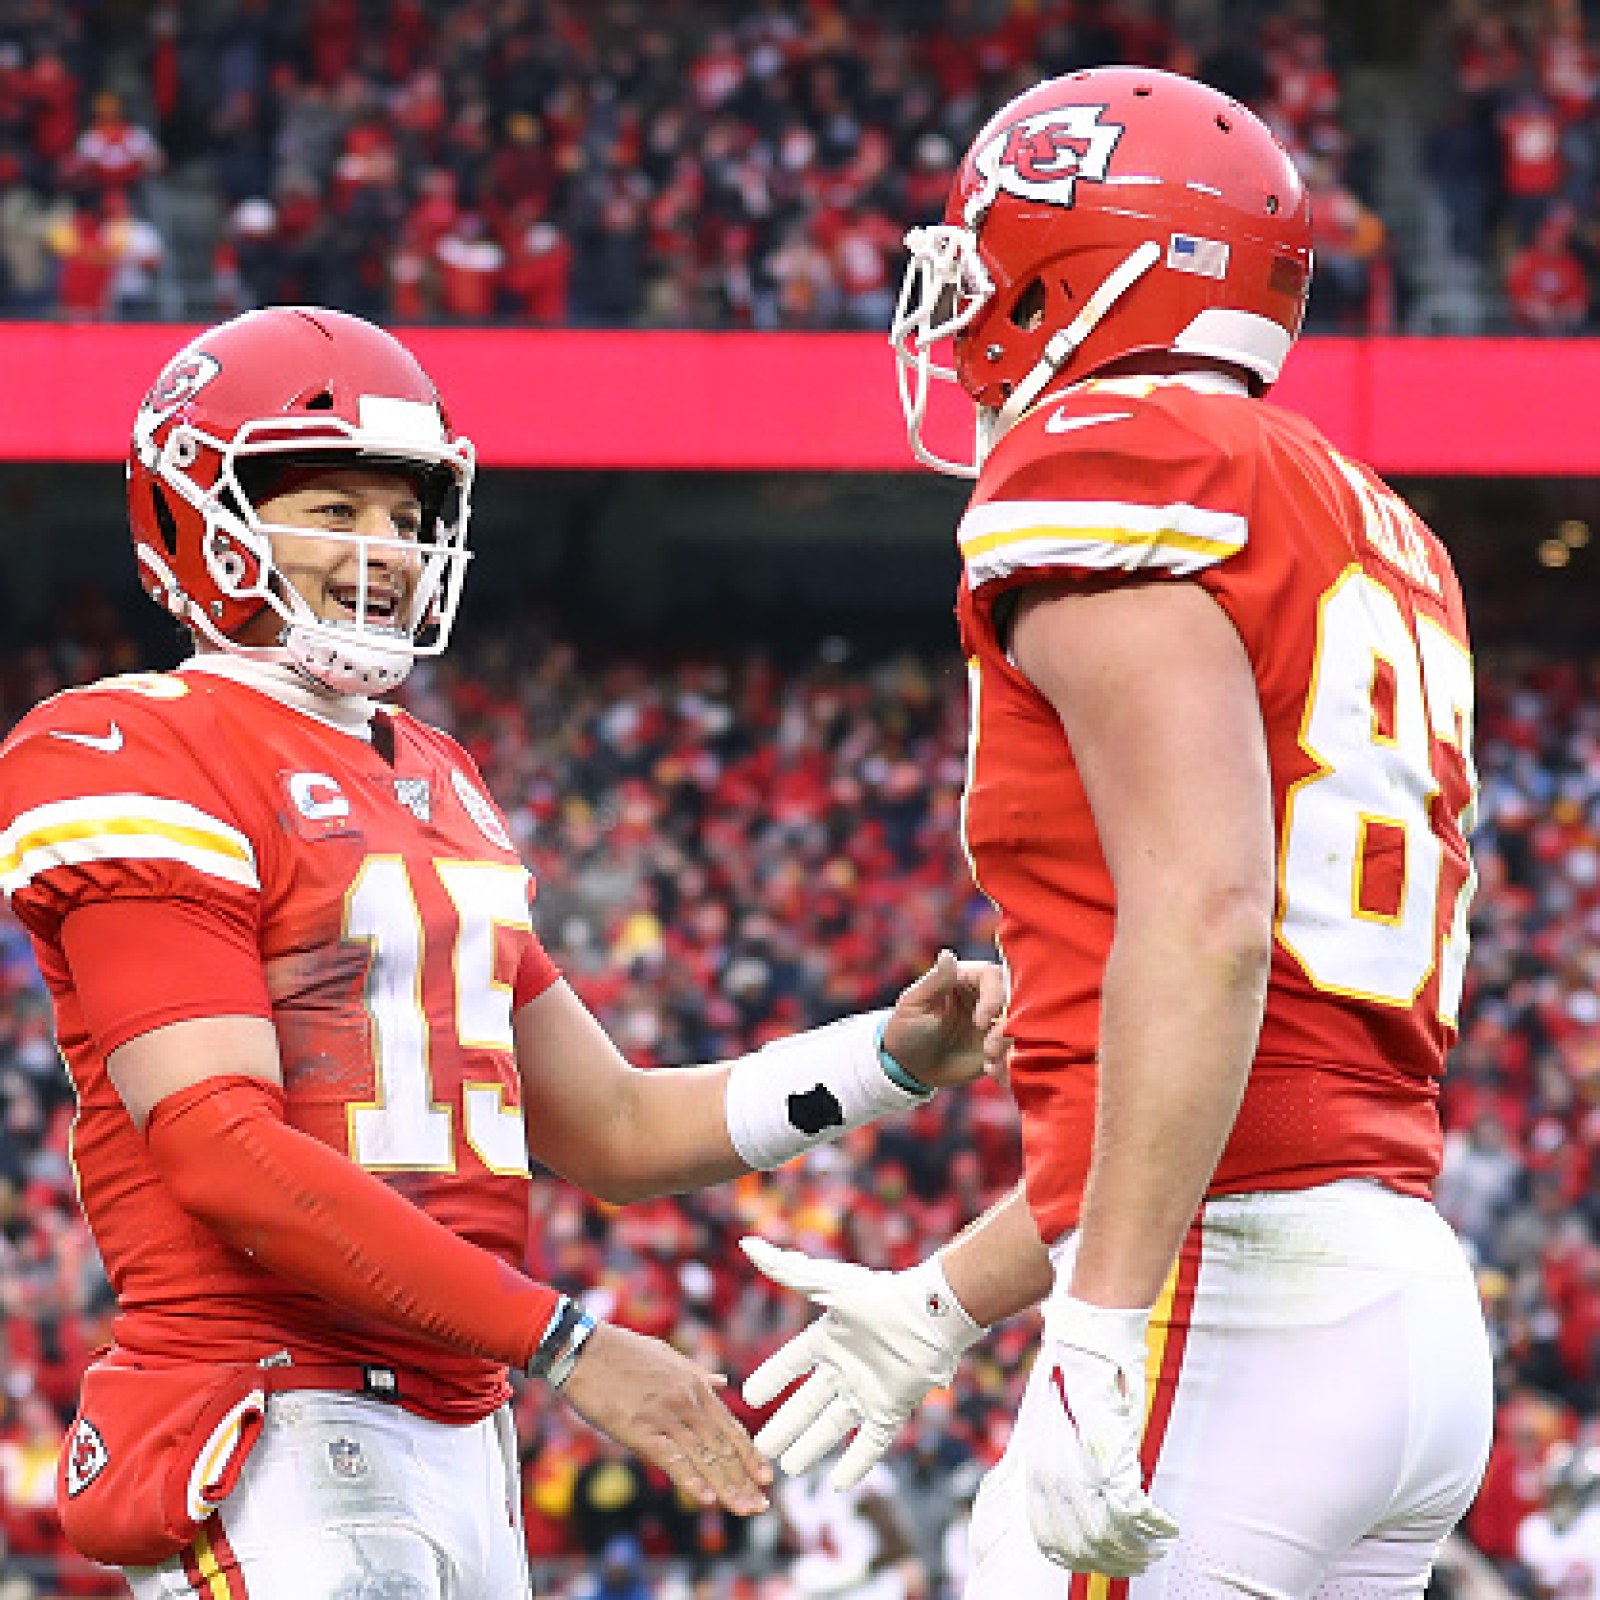 Kansas City Chiefs Win Wild, Record-Filled Game and Open As The